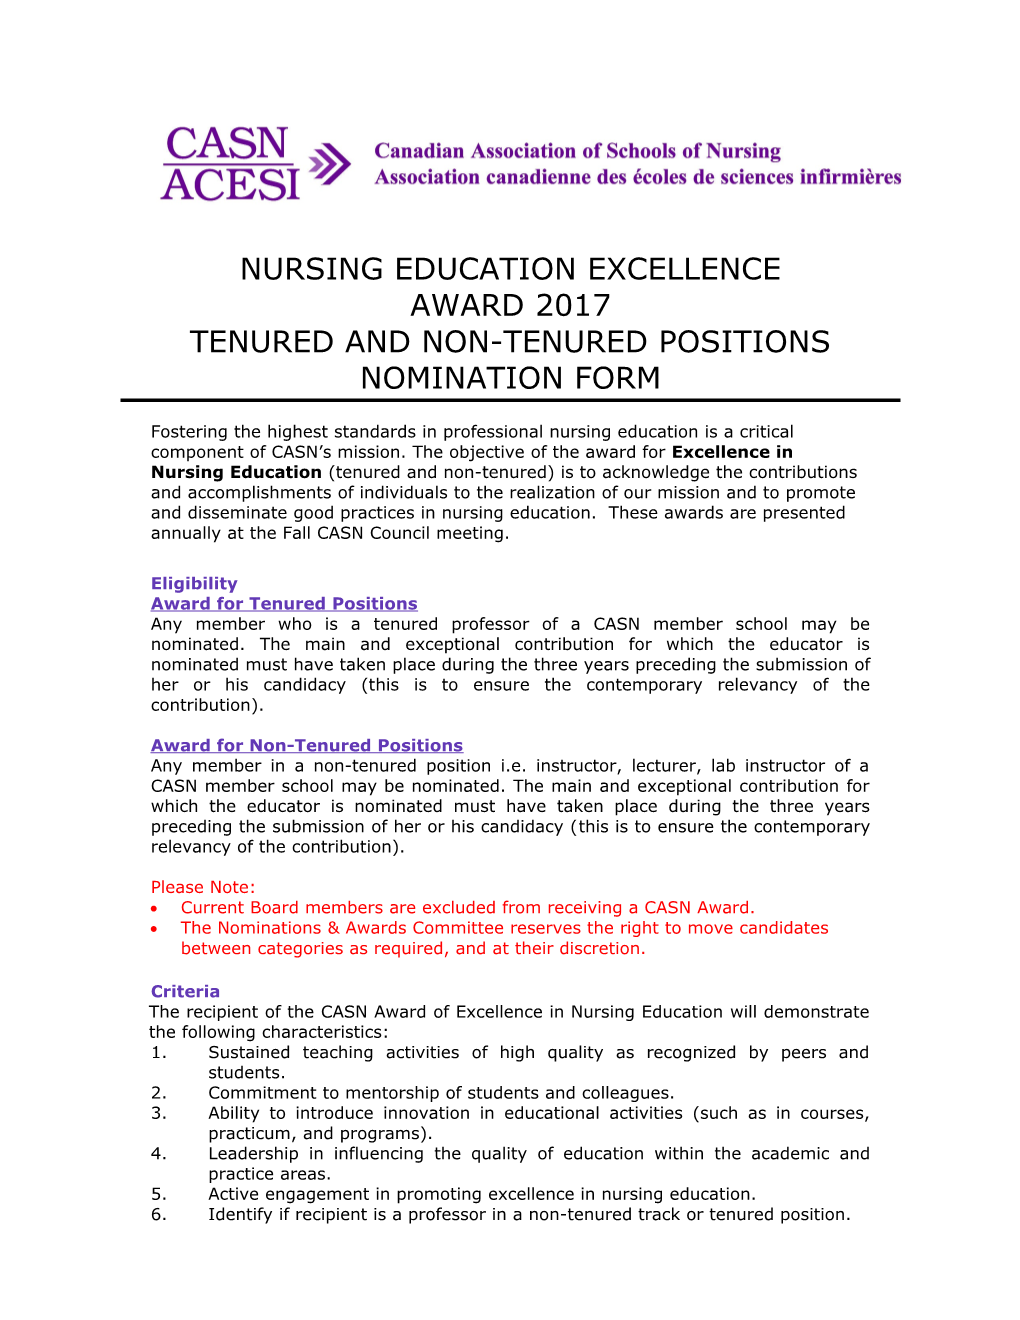 Tenured and Non-Tenured Positions